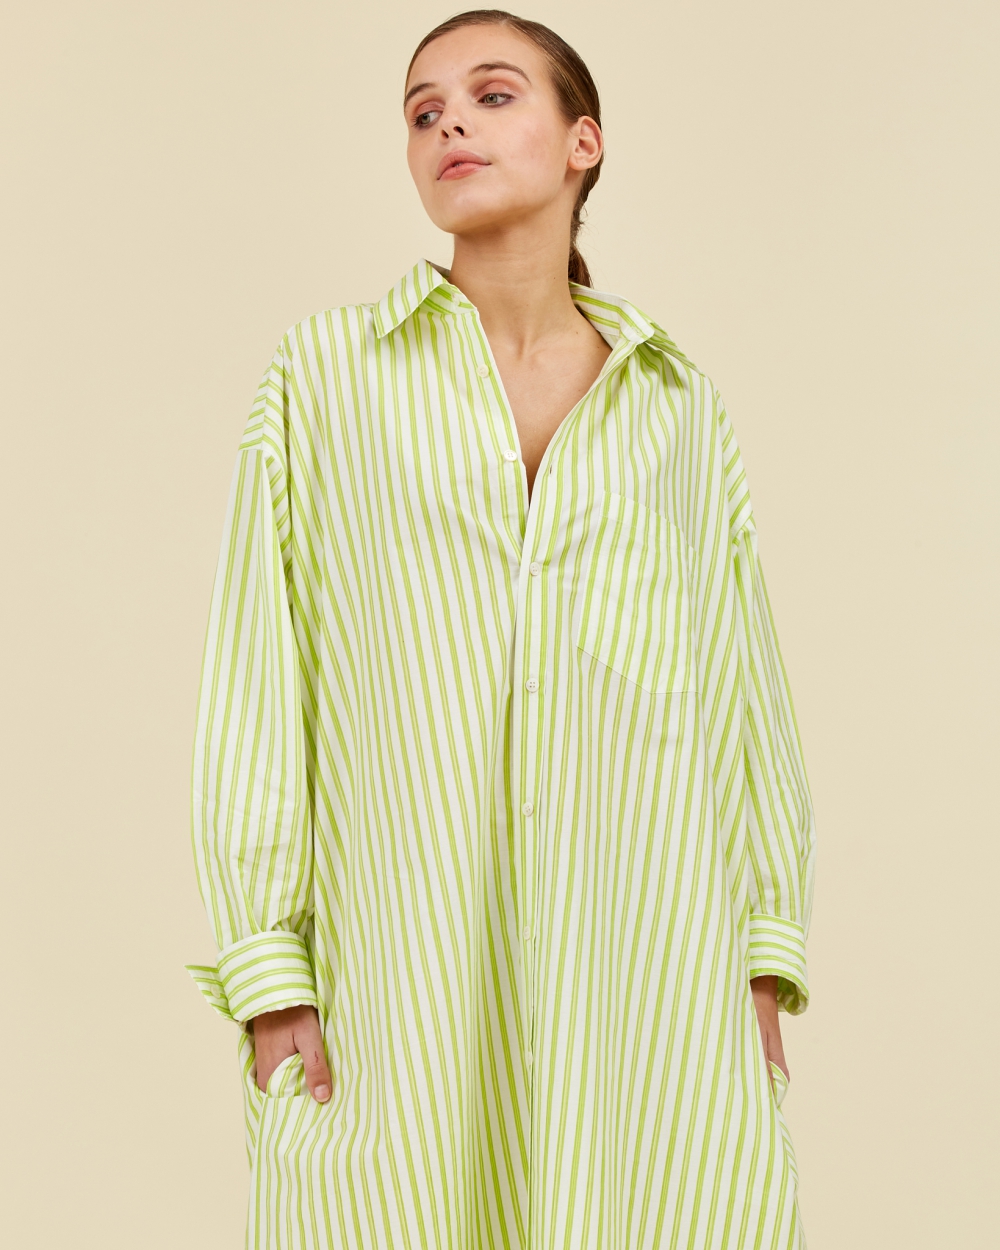 https://www.seamehappy.be/wp-content/uploads/2023/01/Sea-Me-Happy-Geenah-shirt-dress-stripes-lime-front2.jpg